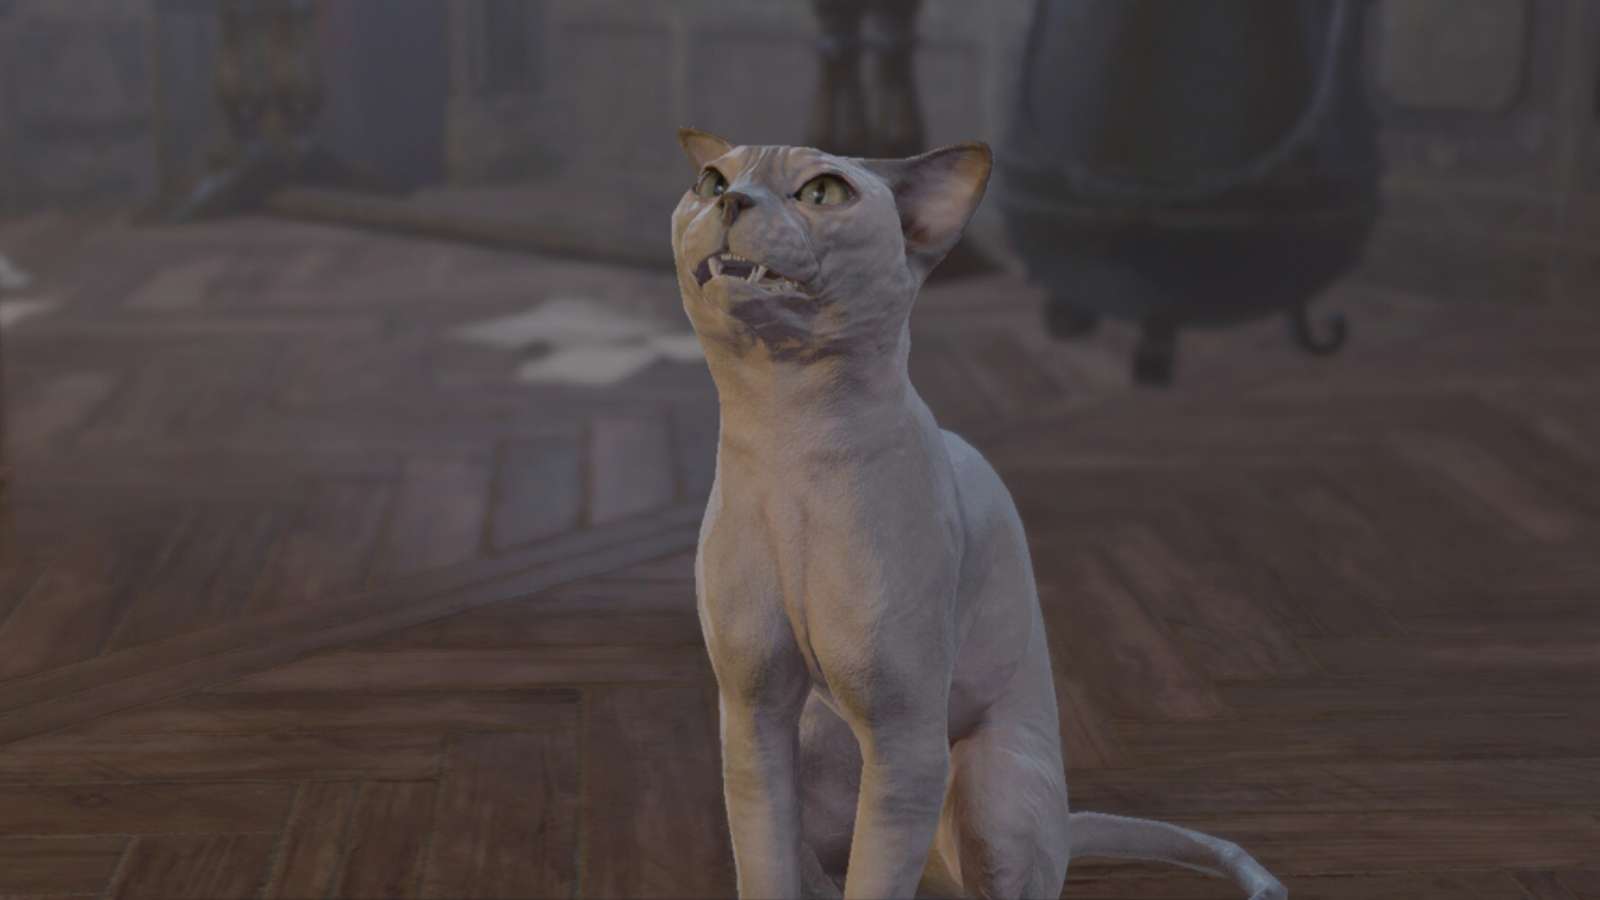 His Majesty the hairless cat in Baldur's Gate 3